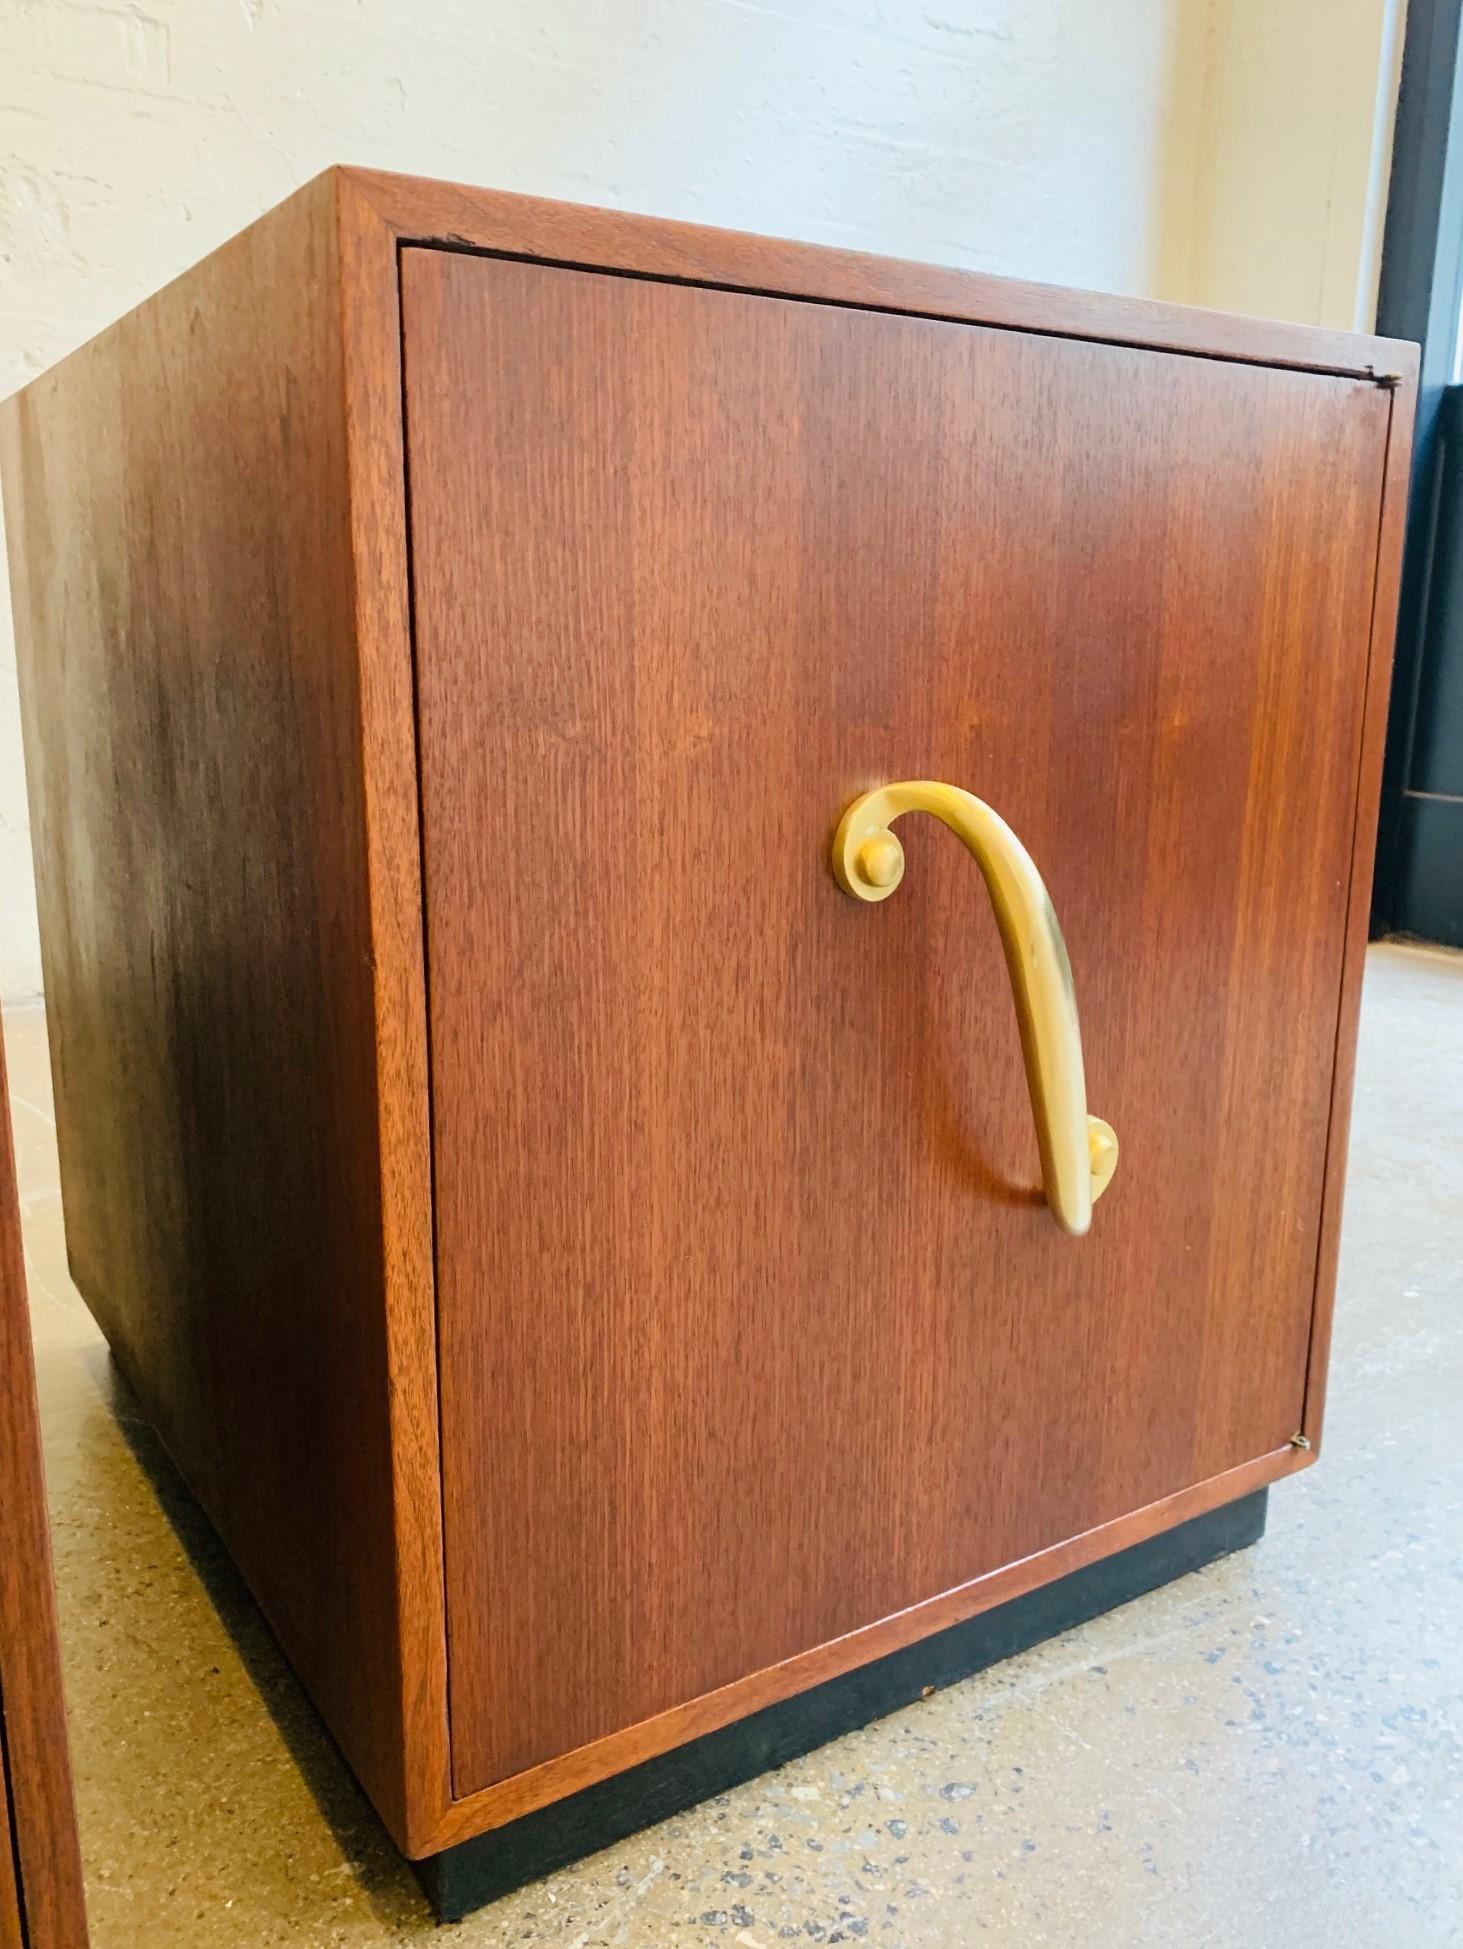 Pair of 1950s mahogany and bronze cabinets or nightstands. Has a solid, heavy bronze handle, a smoked glass top with an ebonized base. Has an adjustable shelf. Hollywood Regency style.